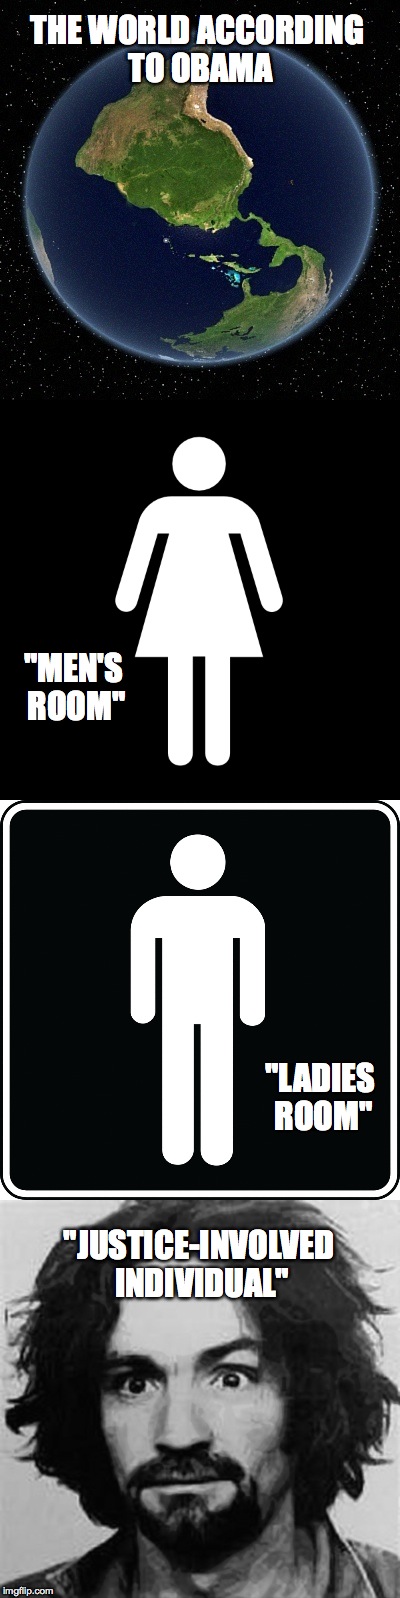 The World According to Obama | THE WORLD ACCORDING TO OBAMA; "MEN'S ROOM"; "LADIES ROOM"; "JUSTICE-INVOLVED INDIVIDUAL" | image tagged in obama,men's room,ladies room,justice-involved individual | made w/ Imgflip meme maker